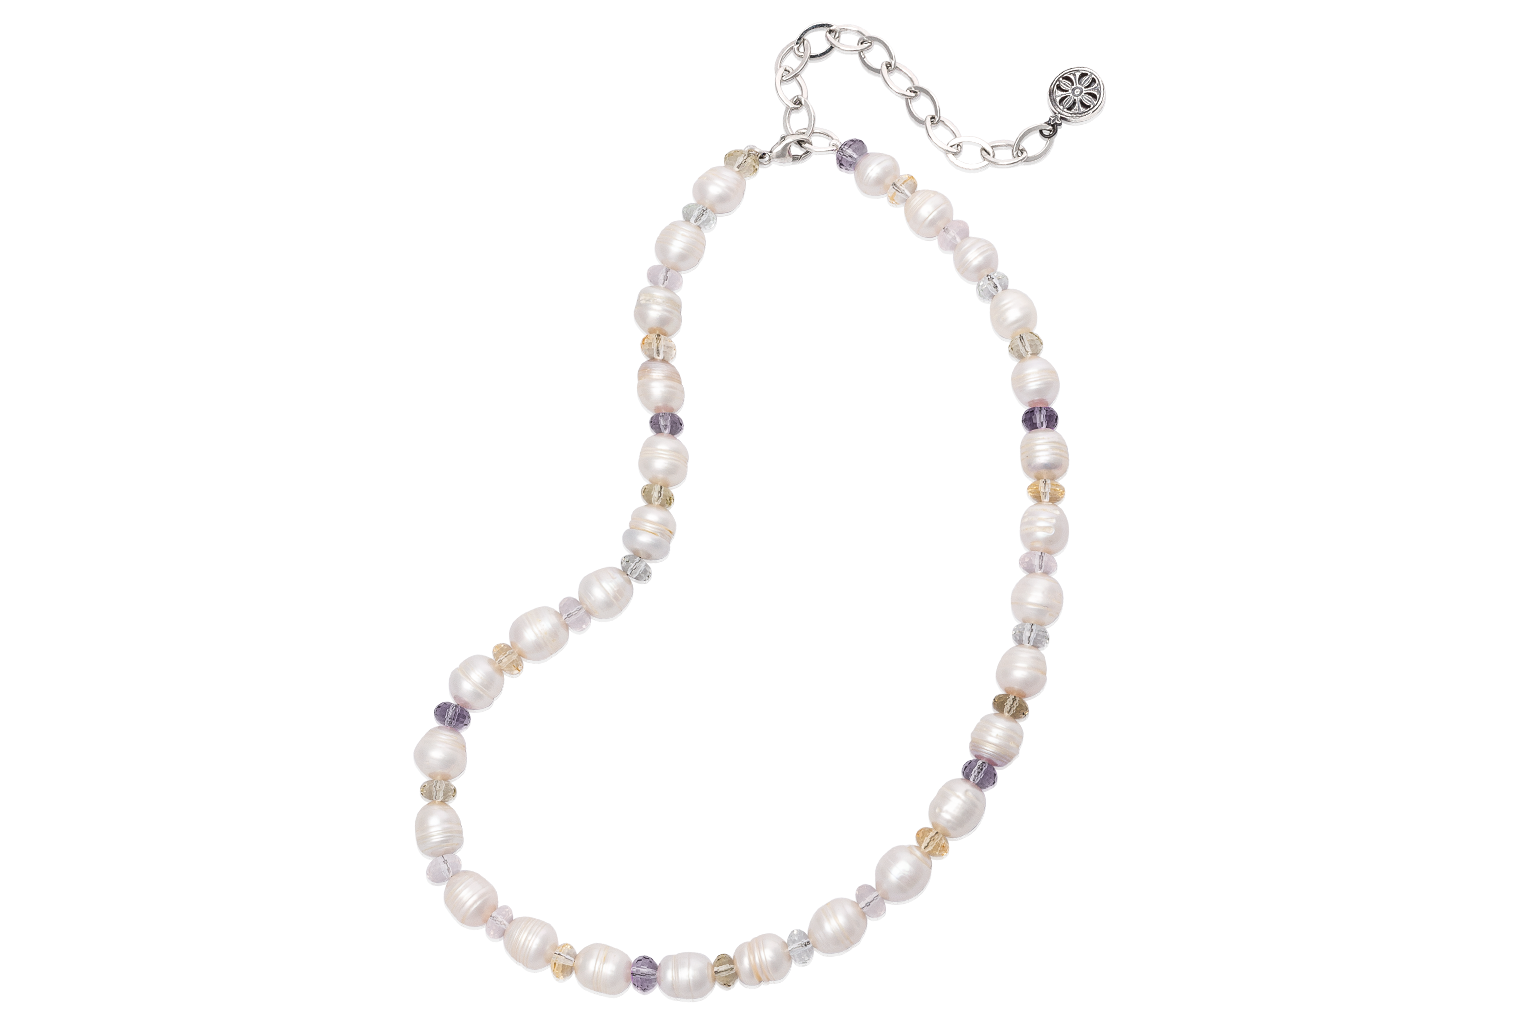 Mignon Faget Ribbon Clasp Pearl Necklace - Sterling Silver - Silver / Pink